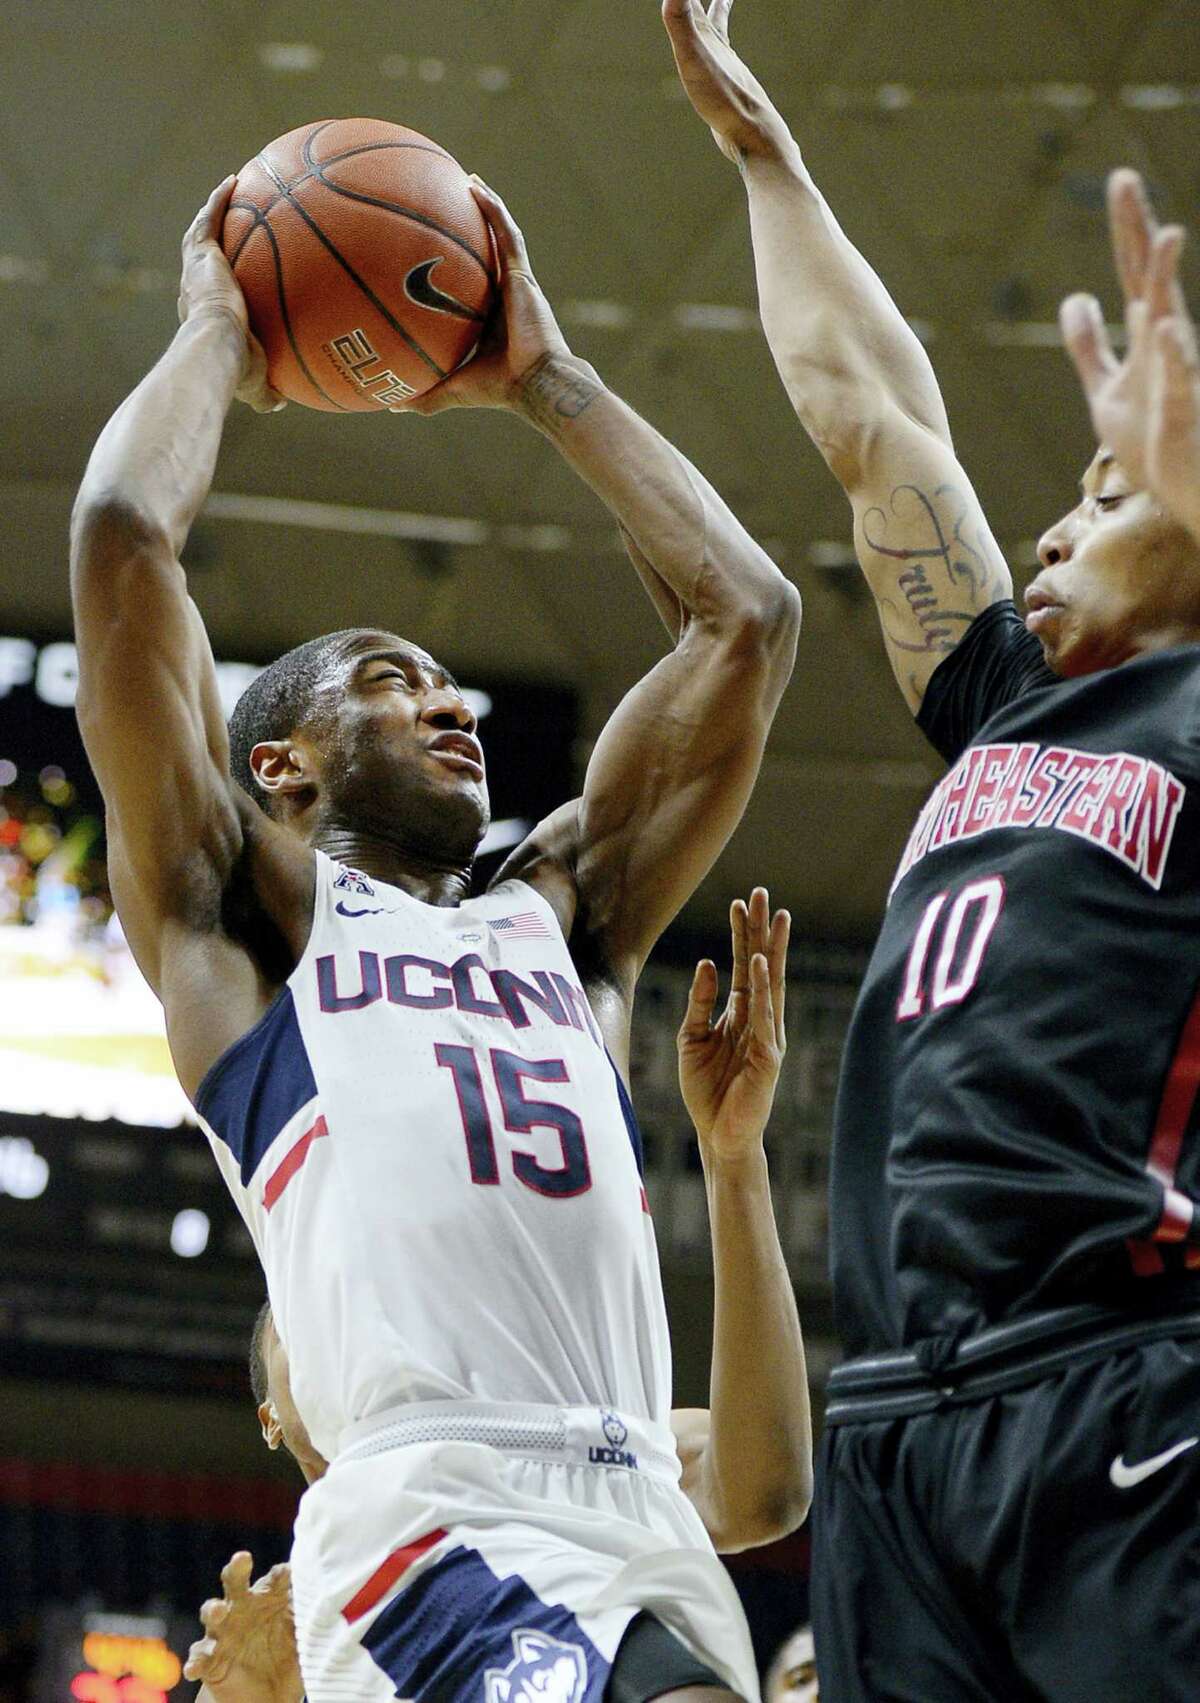 UConn’s Rodney Purvis drives to the basket during a recent game.